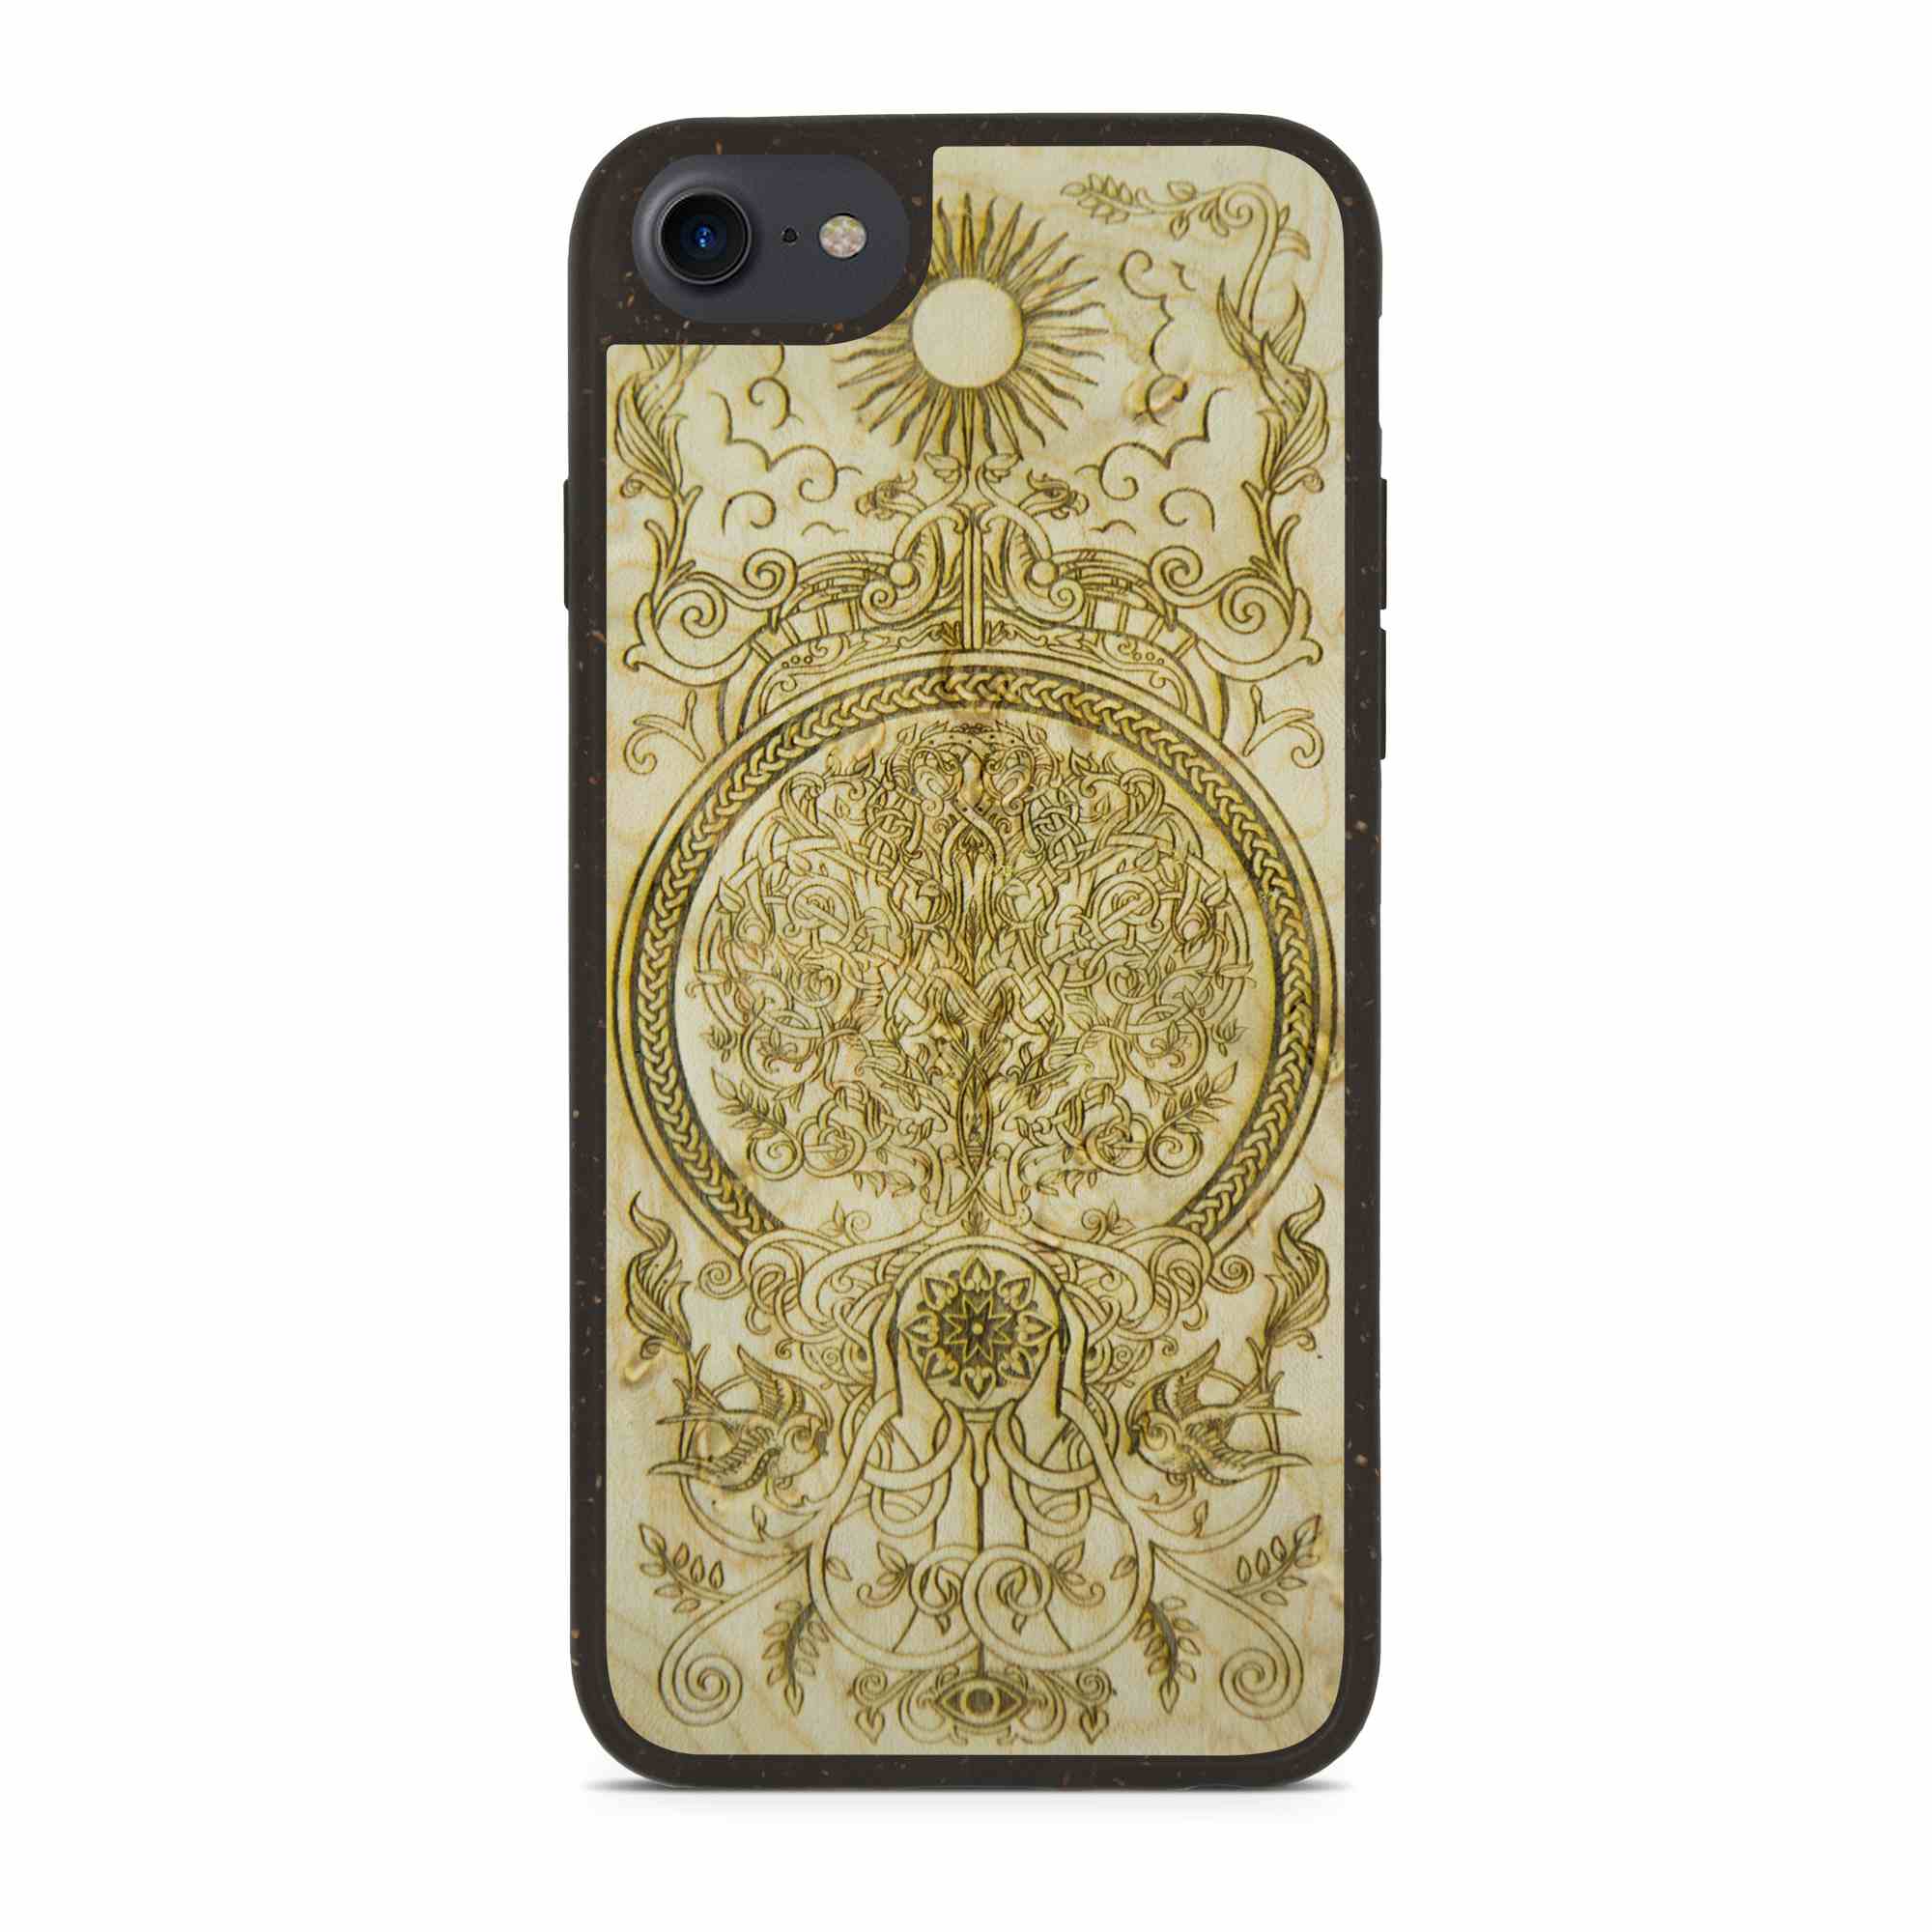 Tree ogf live Engraved in wood iphone case